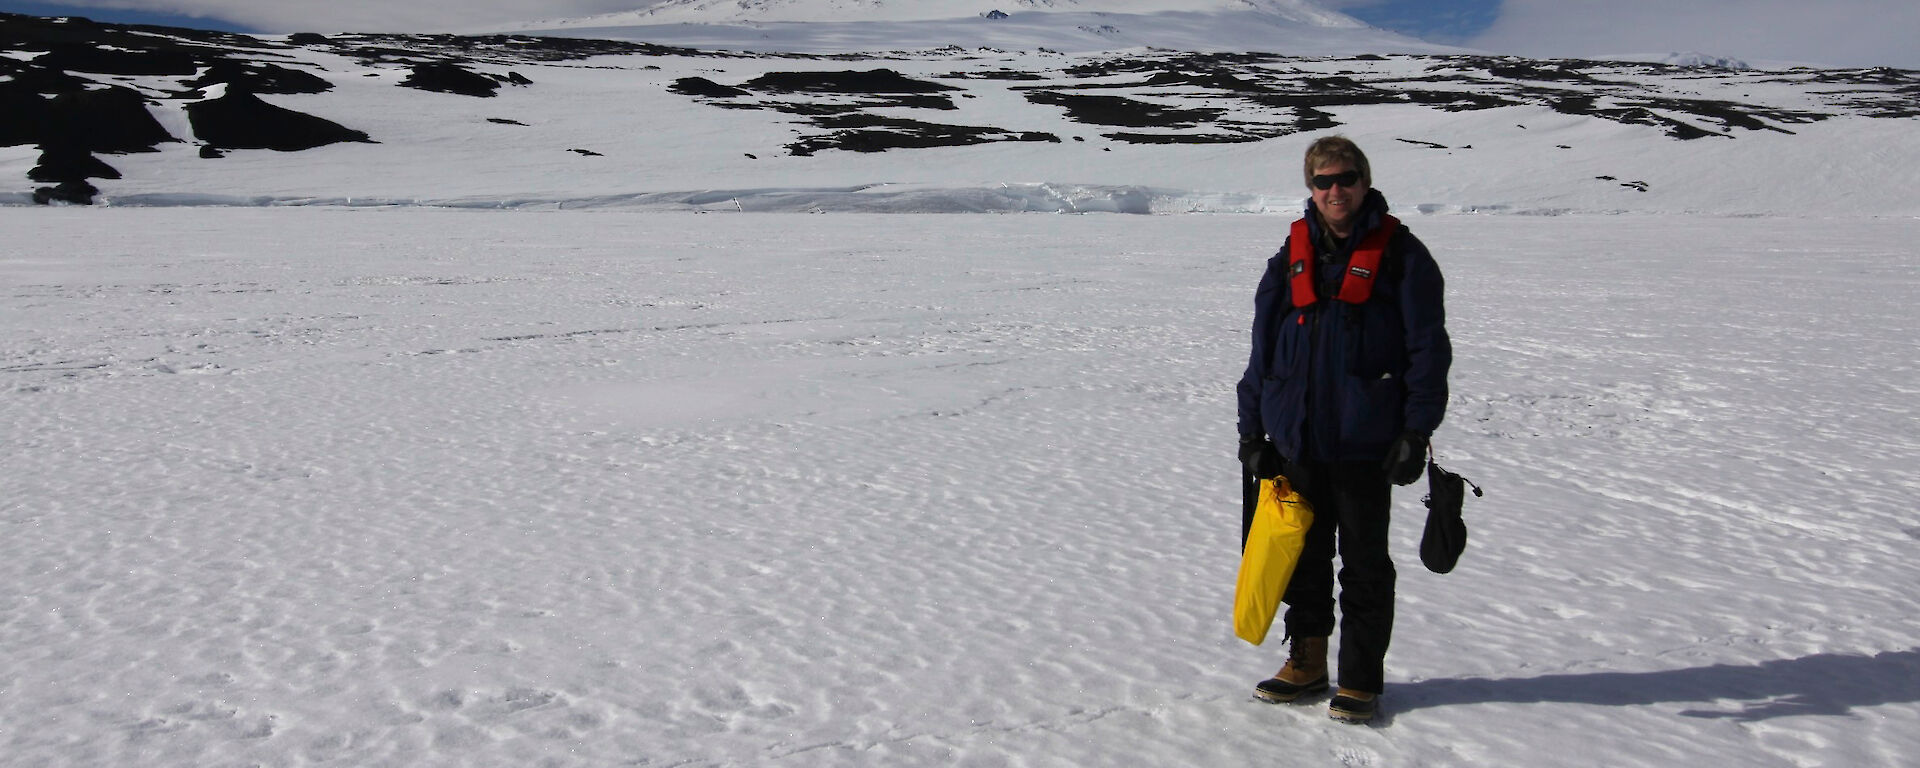 Dr Tony Fleming in front of Mt Erebus on Ross Island, during his trip to Antarctica earlier this year.